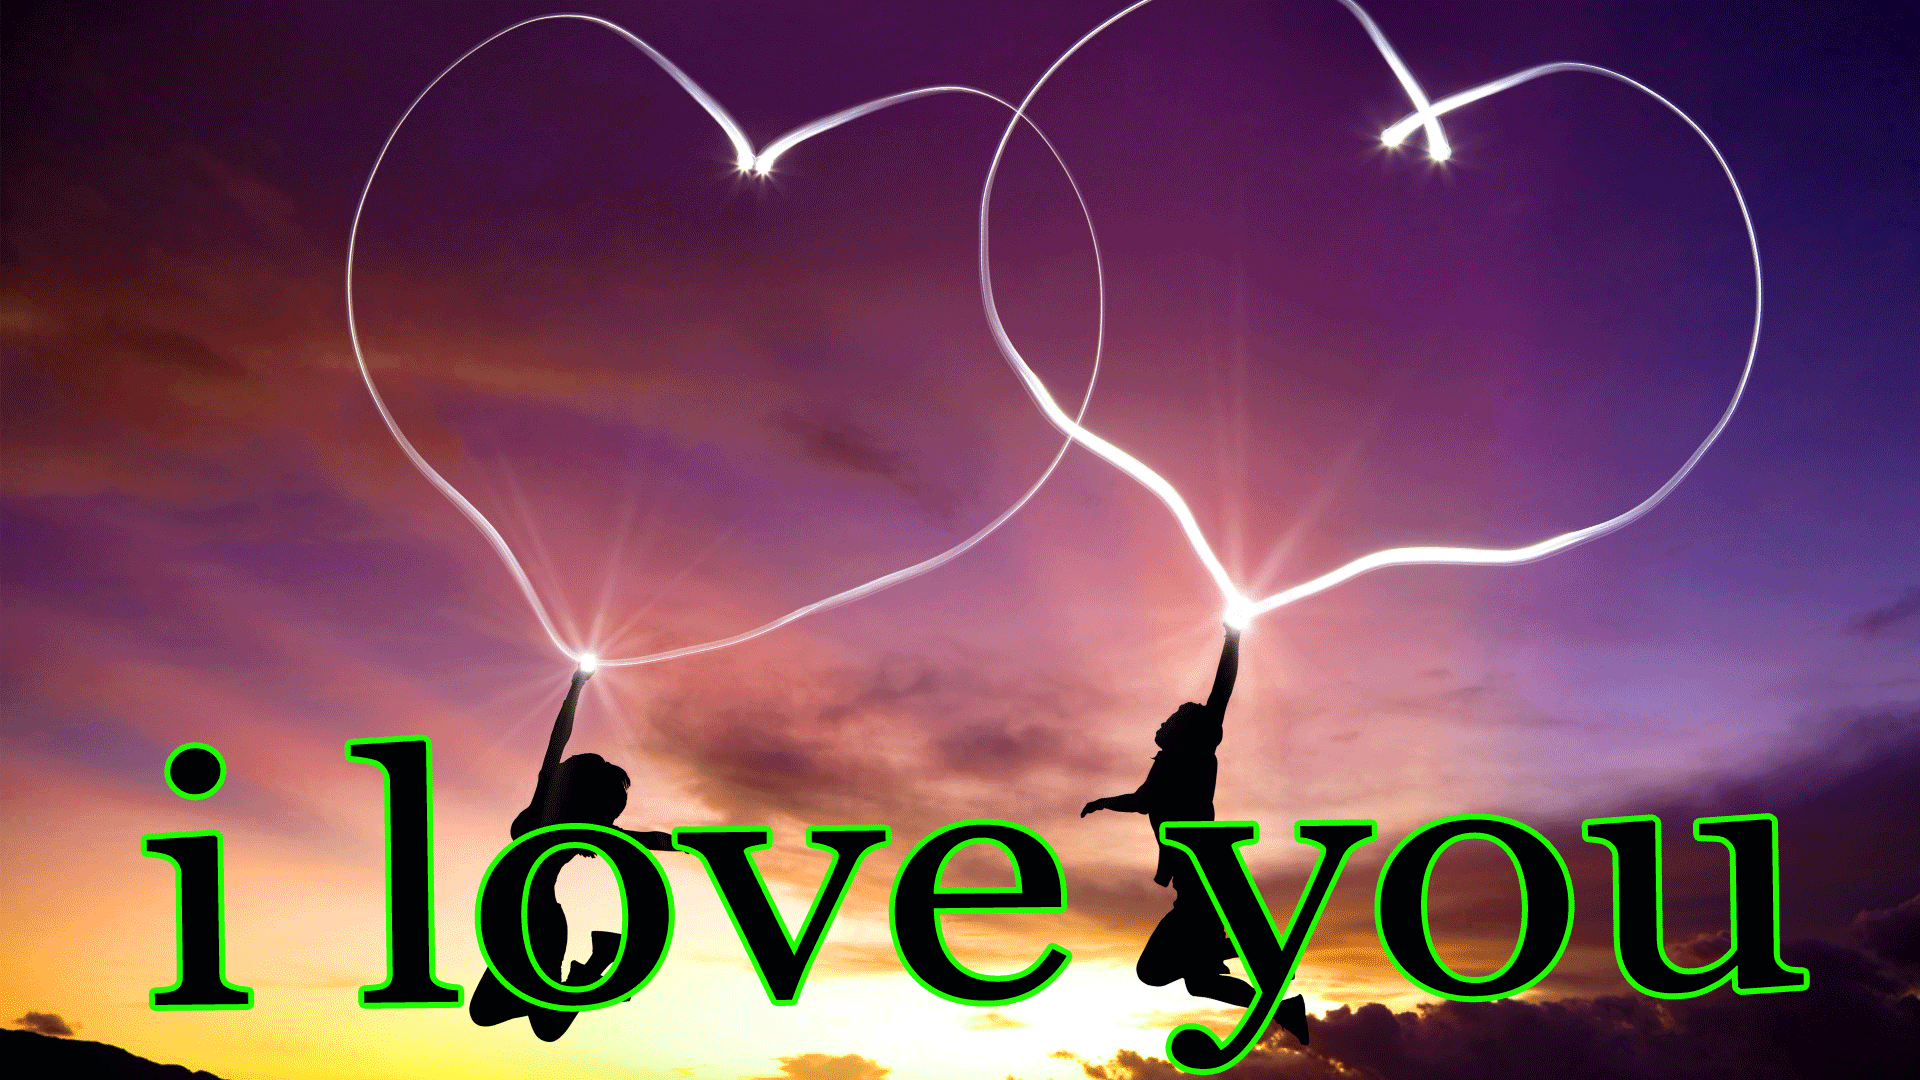 I Love You Images Wallpaper Pictures Free Download - Love You , HD Wallpaper & Backgrounds